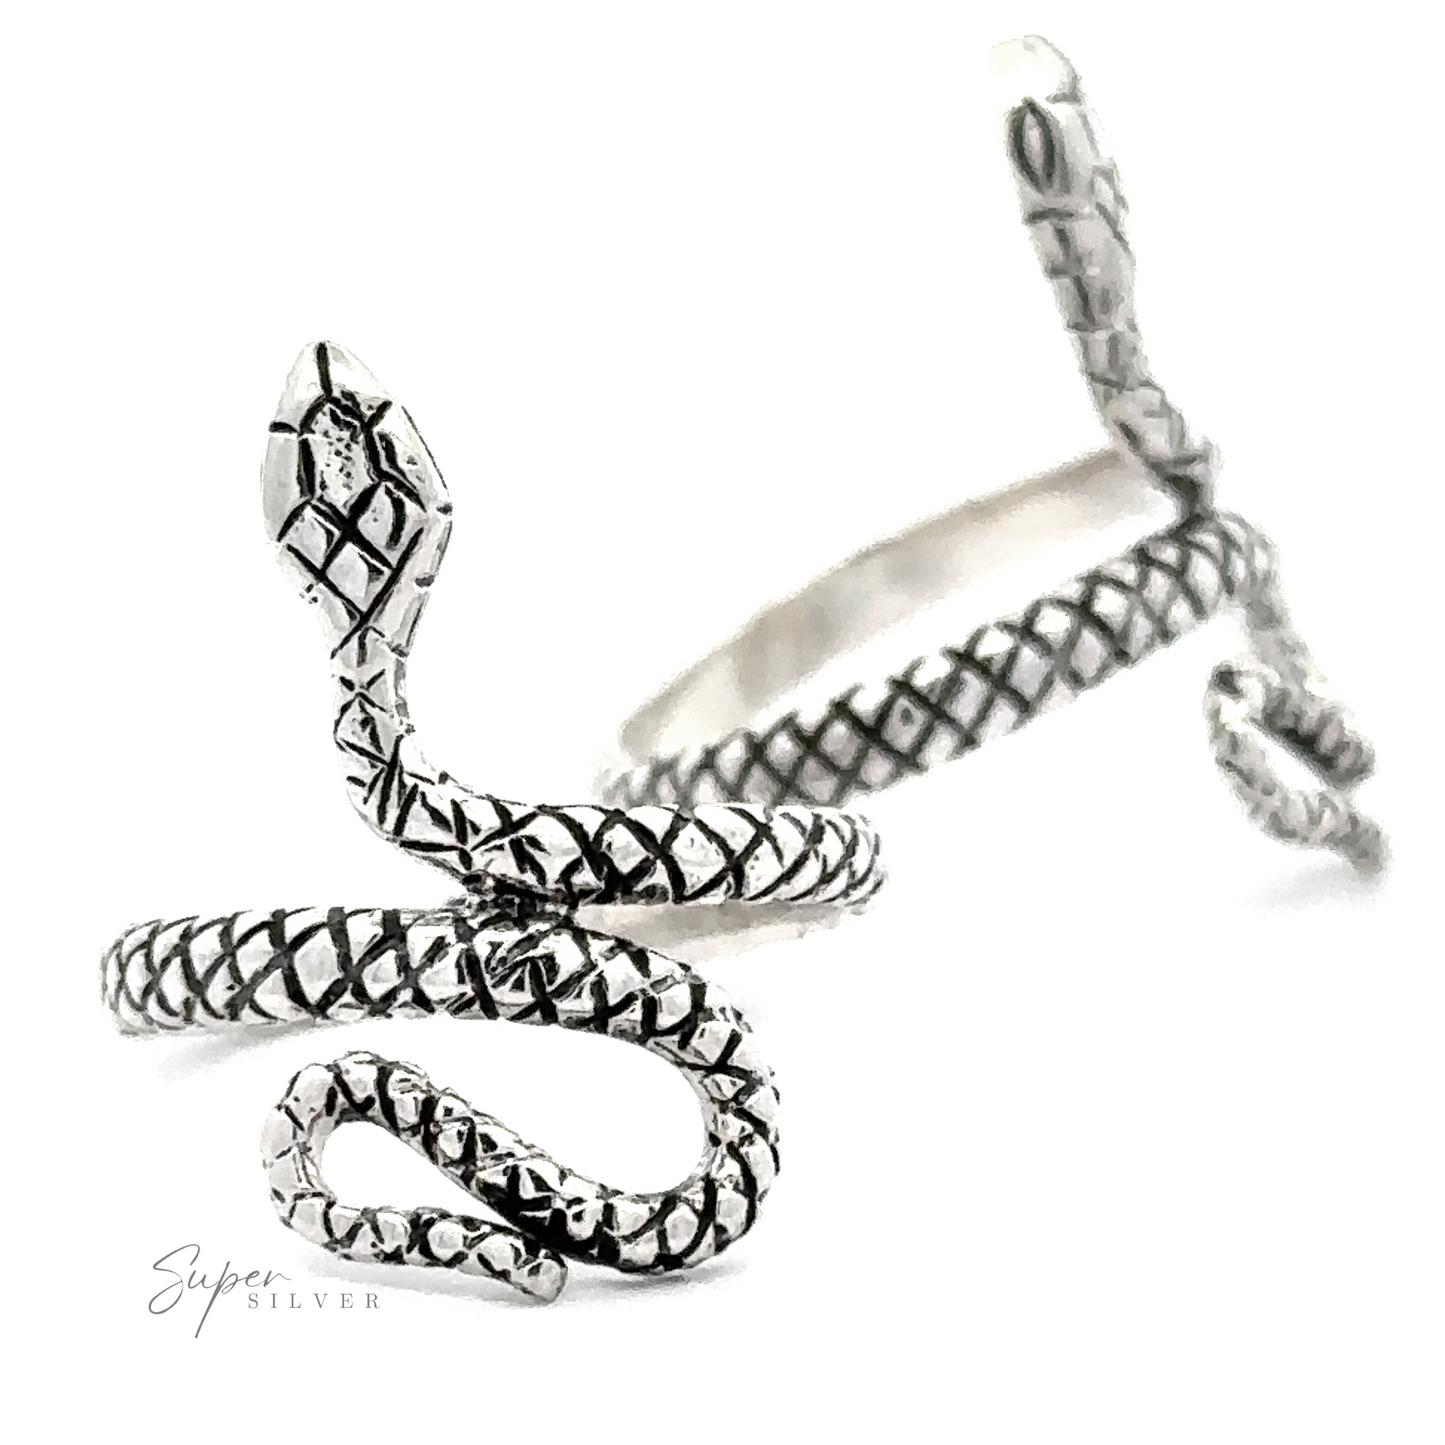 Sterling silver Textured Winding Snake Ring with scales coiling around, isolated against a white background.